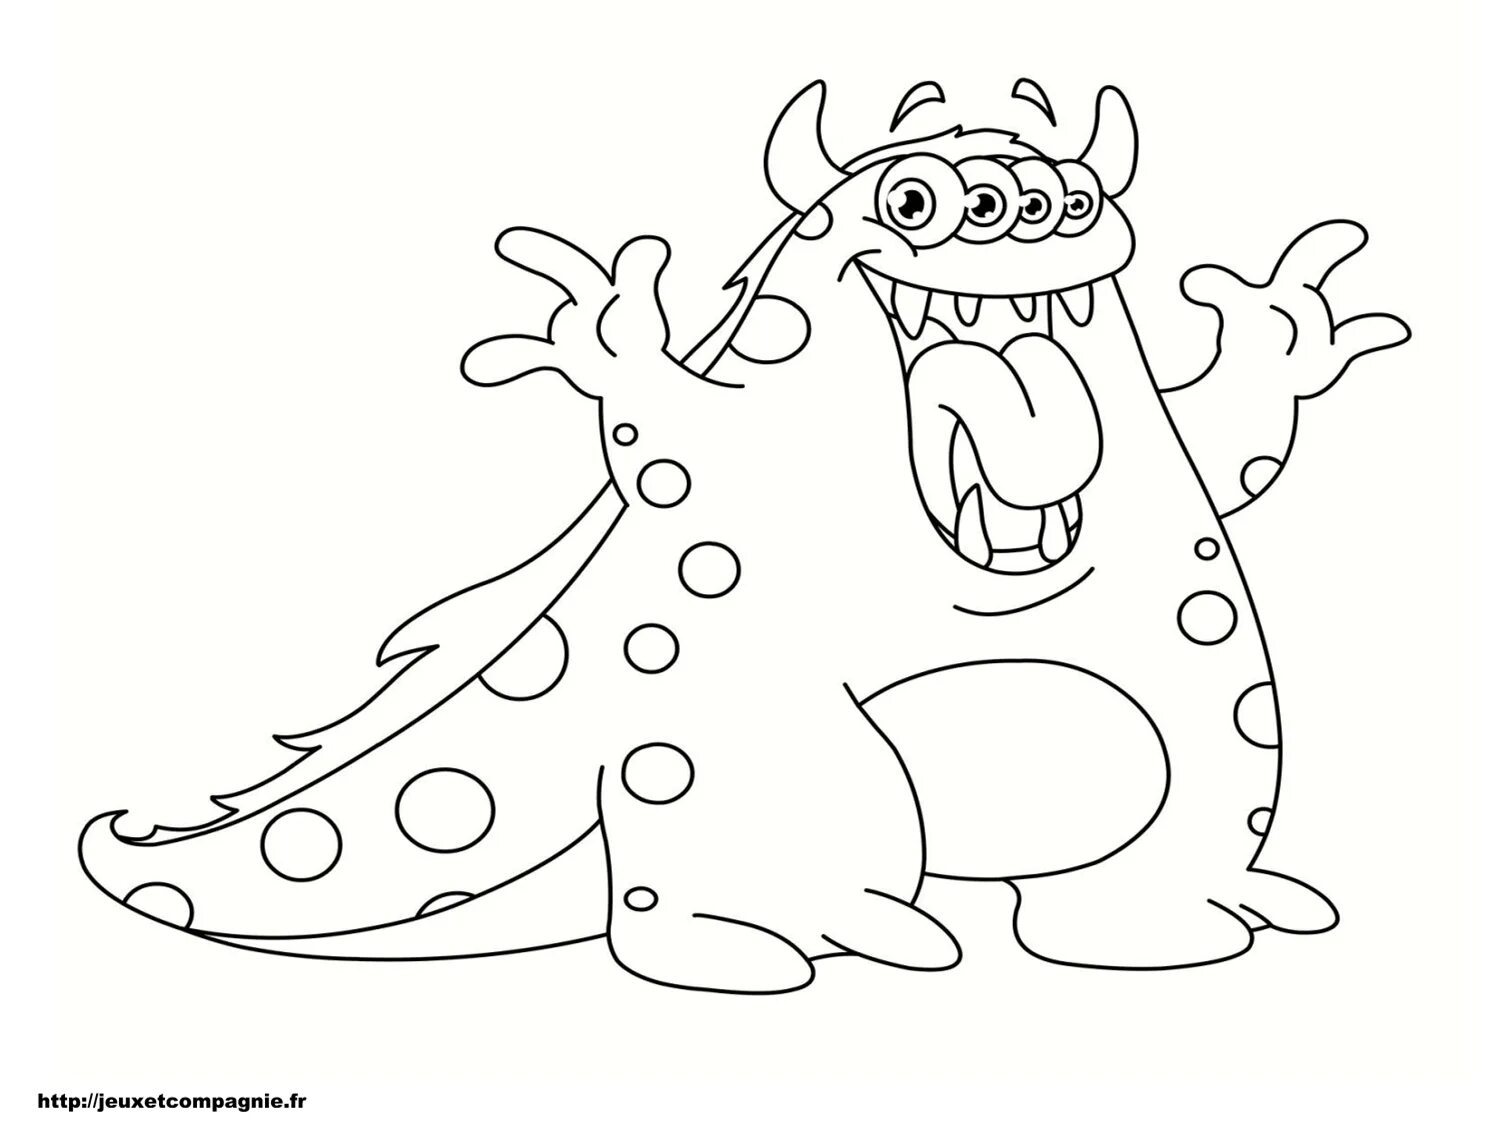 Awesome musical monsters coloring page